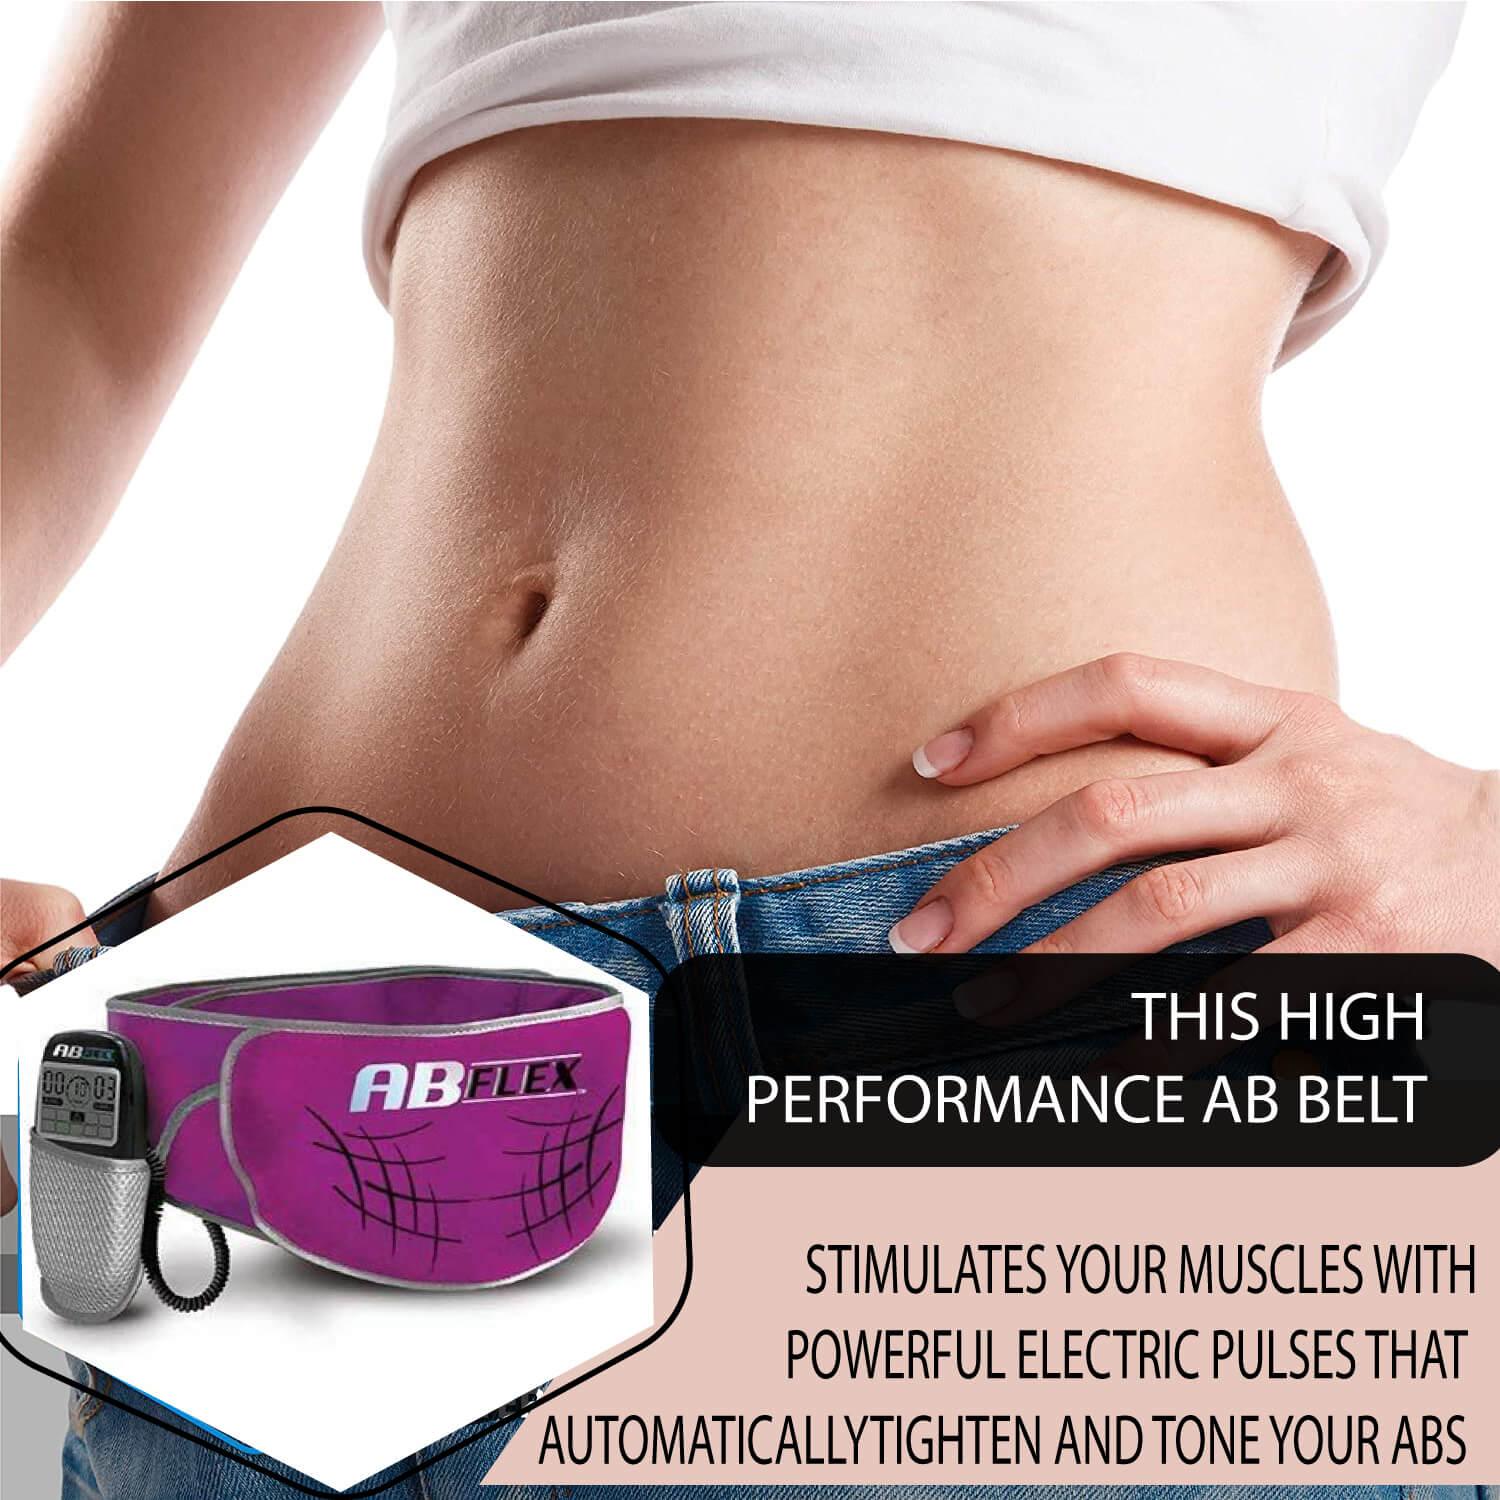 Ab Flex Ab Toning Belt for Slender Toned Stomach Muscles